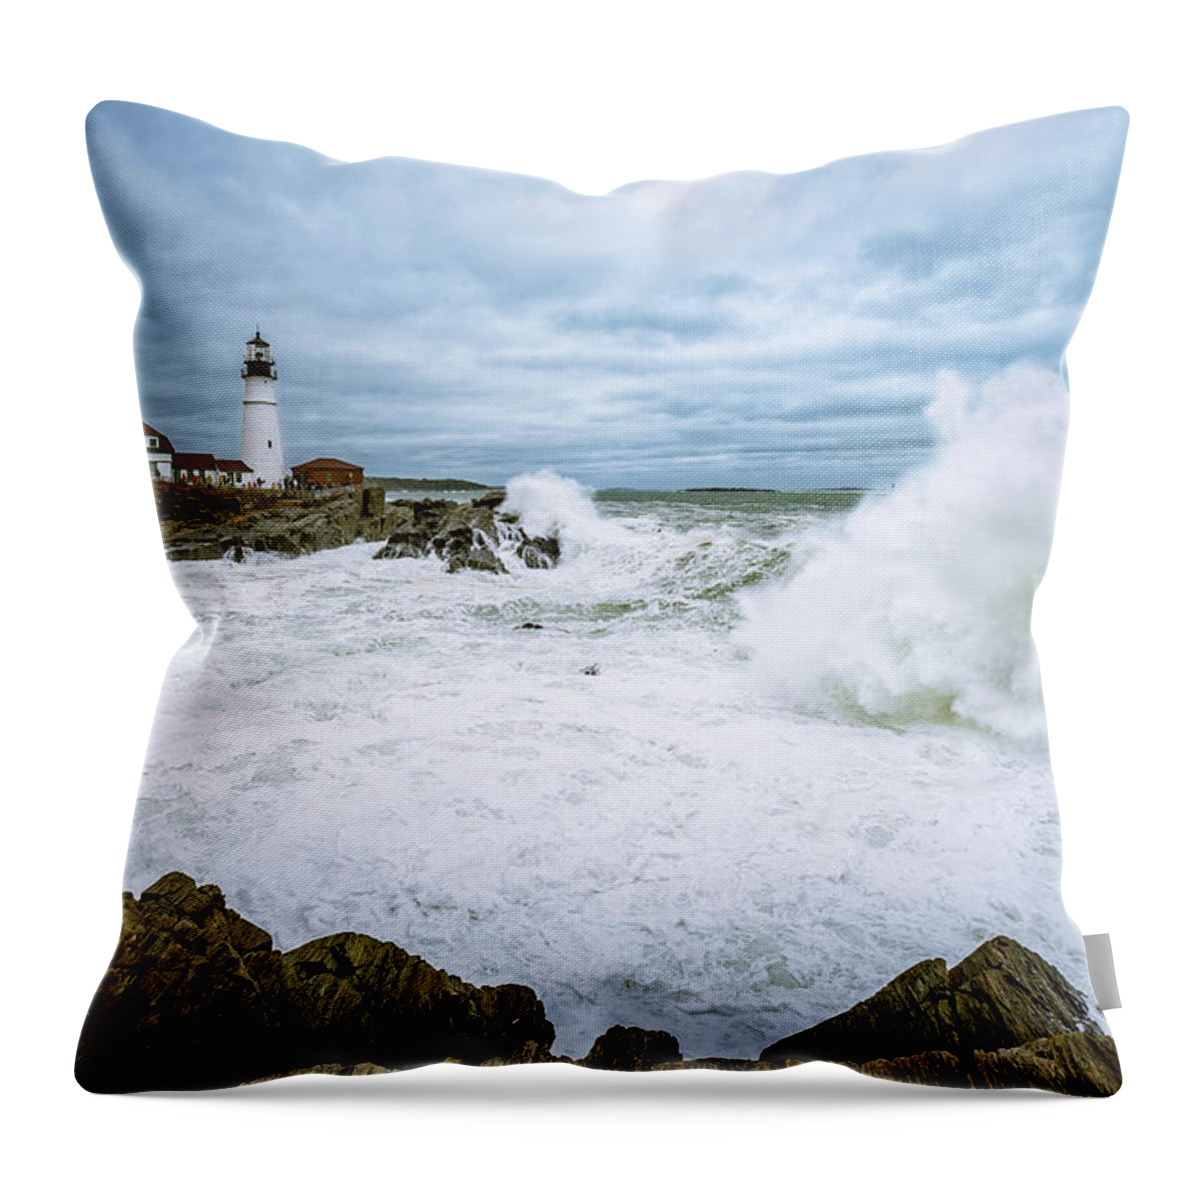 Atlantic Ocean Throw Pillow featuring the photograph The Power Of The Sea, Nor'easter Waves. by Jeff Sinon